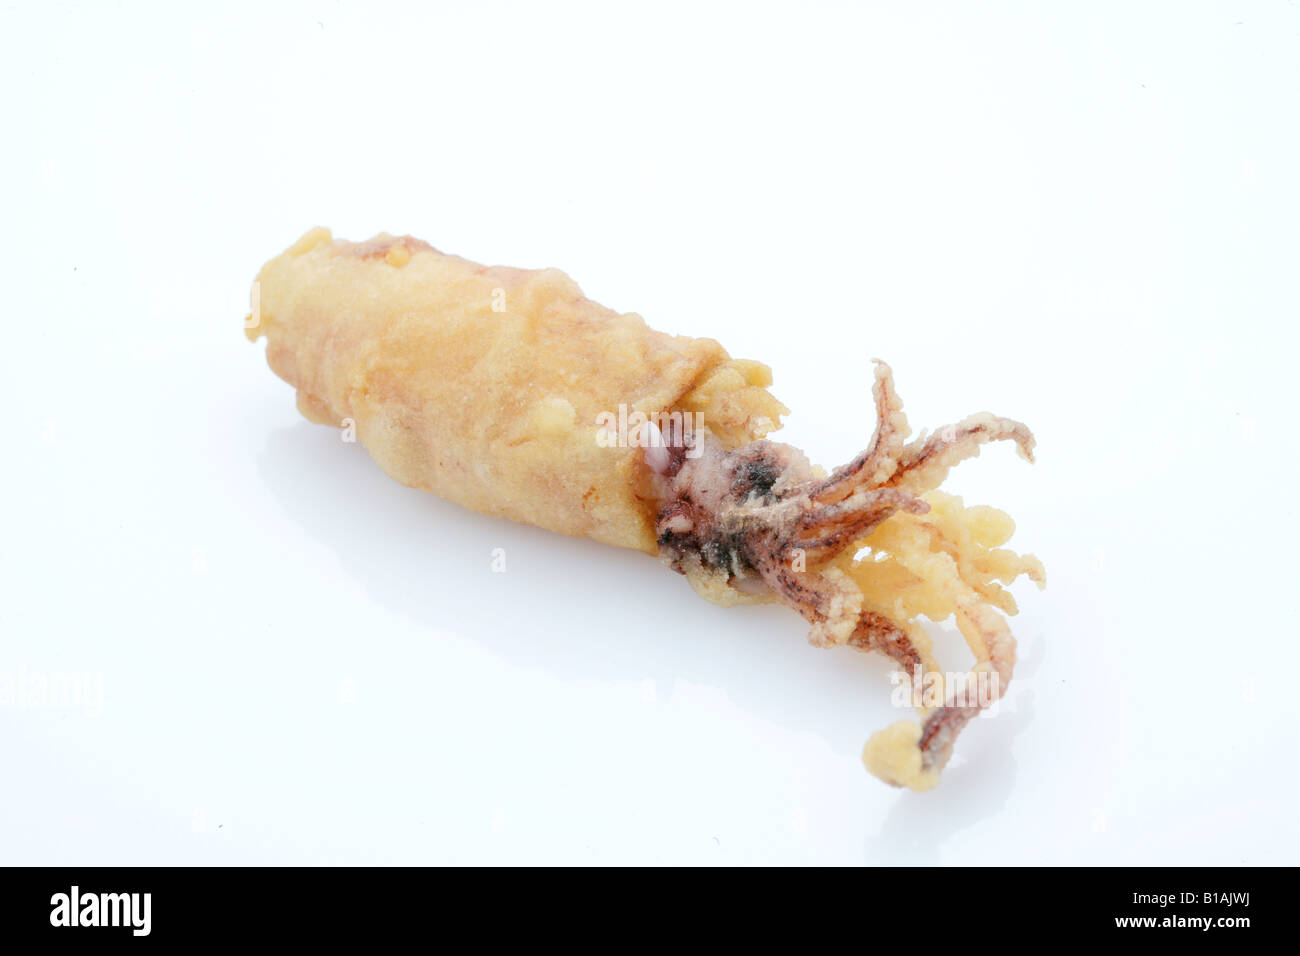 A fried small squid Stock Photo